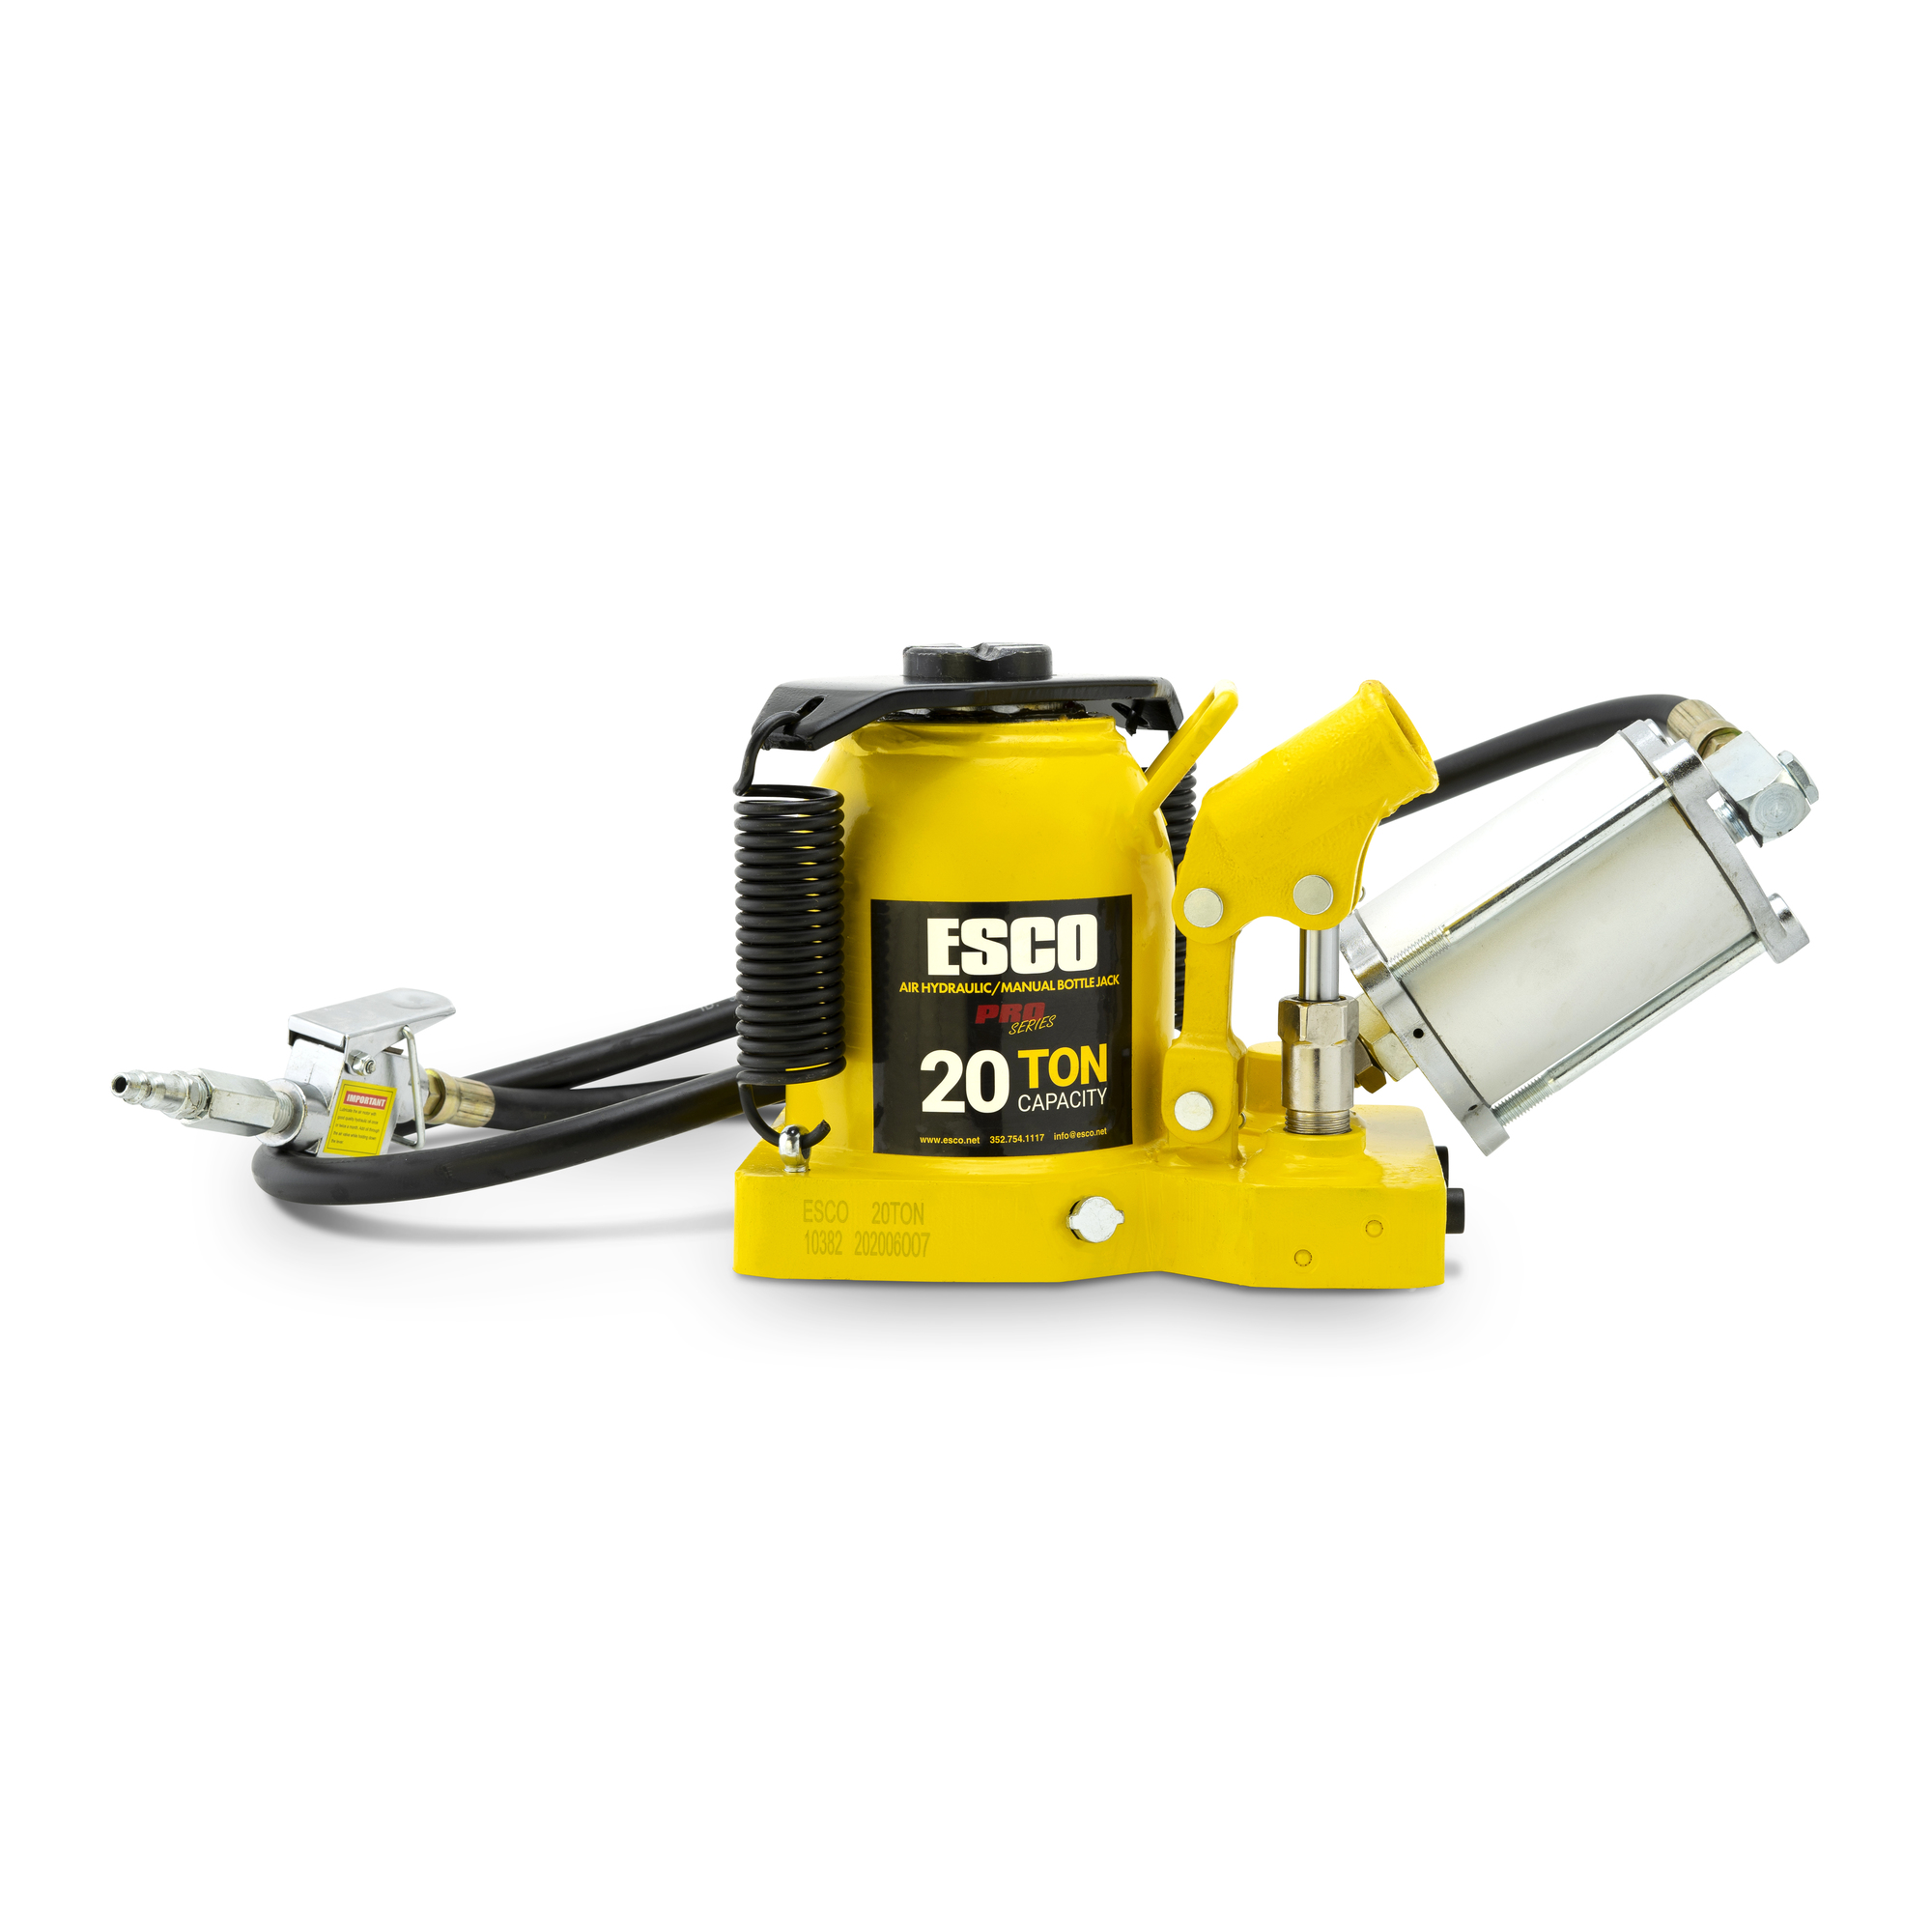 ESCO, 20 Ton Pro Low Hgt Series Air/Hydr Bottle Jack, Lift Capacity 20 Tons, Max. Lift Height 12.625 in, MInch Lift Height 7.125 in, Model 10382